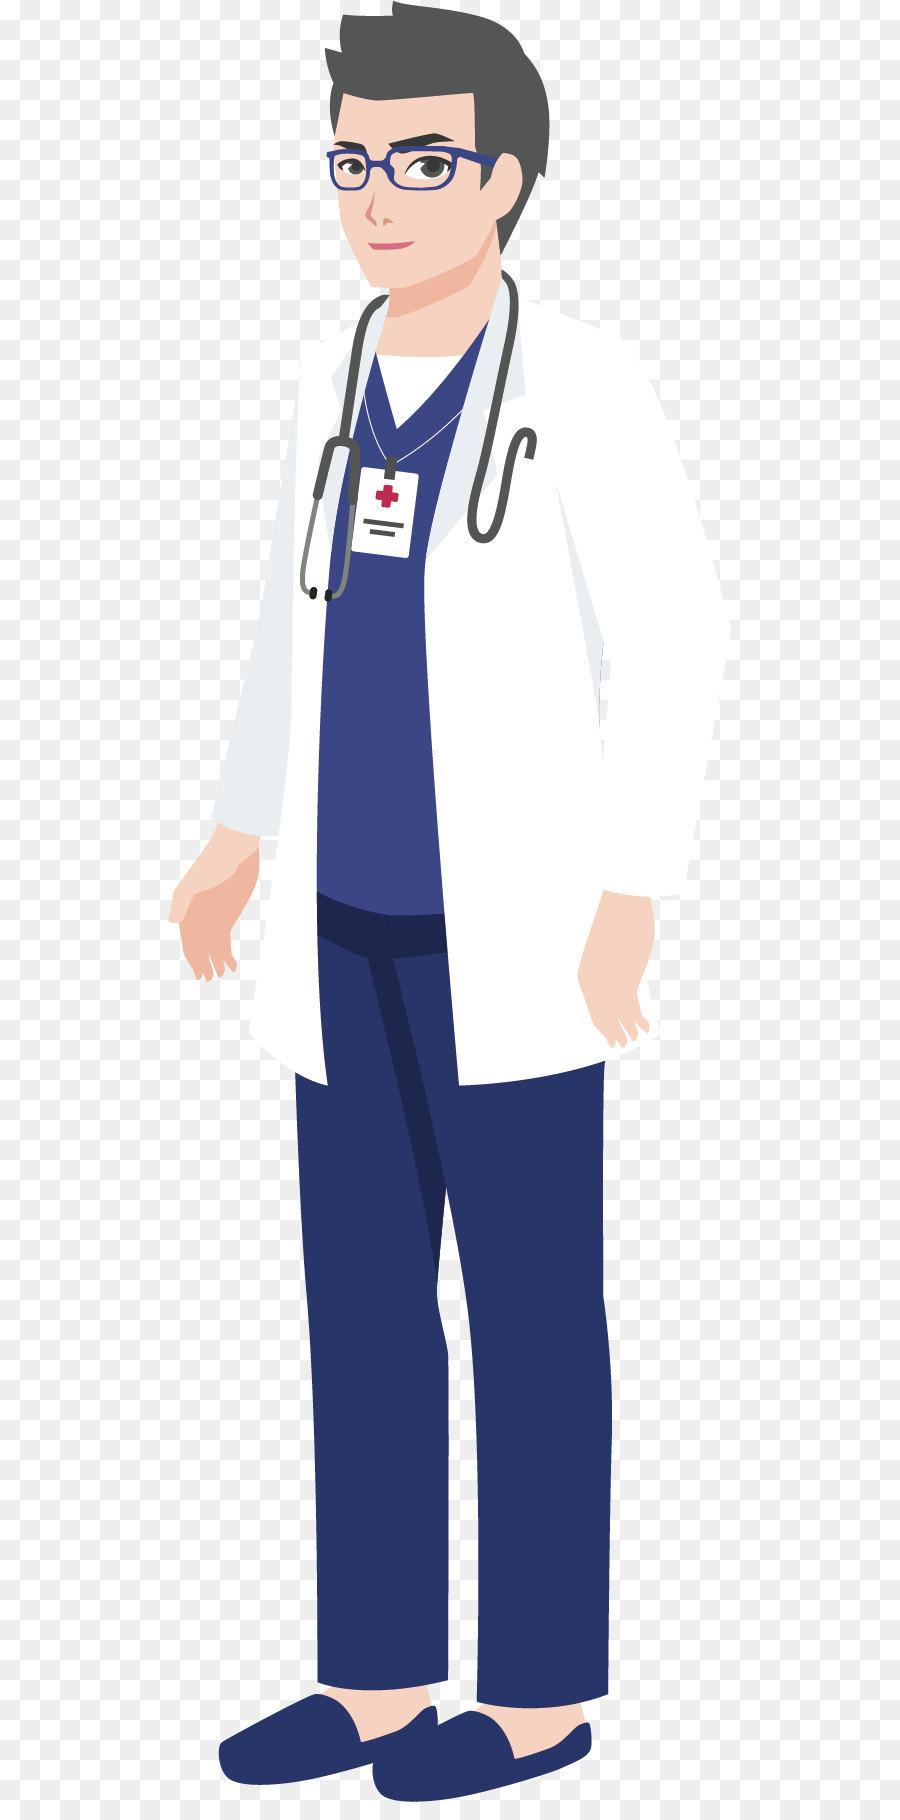 Cartoon Physician Illustration - University doctor png download - 564*1802 - Free Transparent Physician ai,png Download.